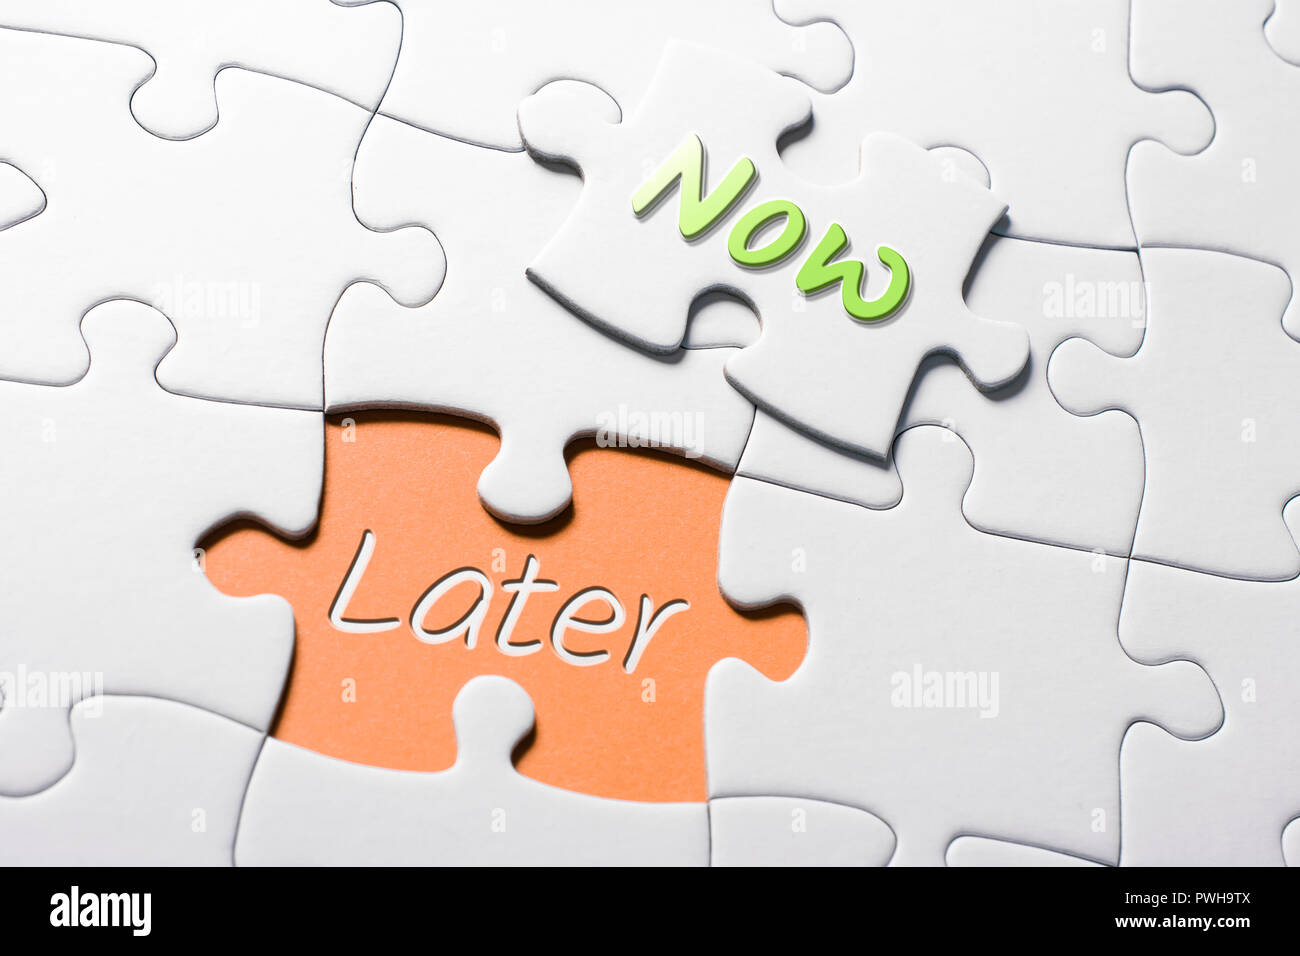 The Words Now And Later In Missing Piece Jigsaw Puzzle Stock Photo